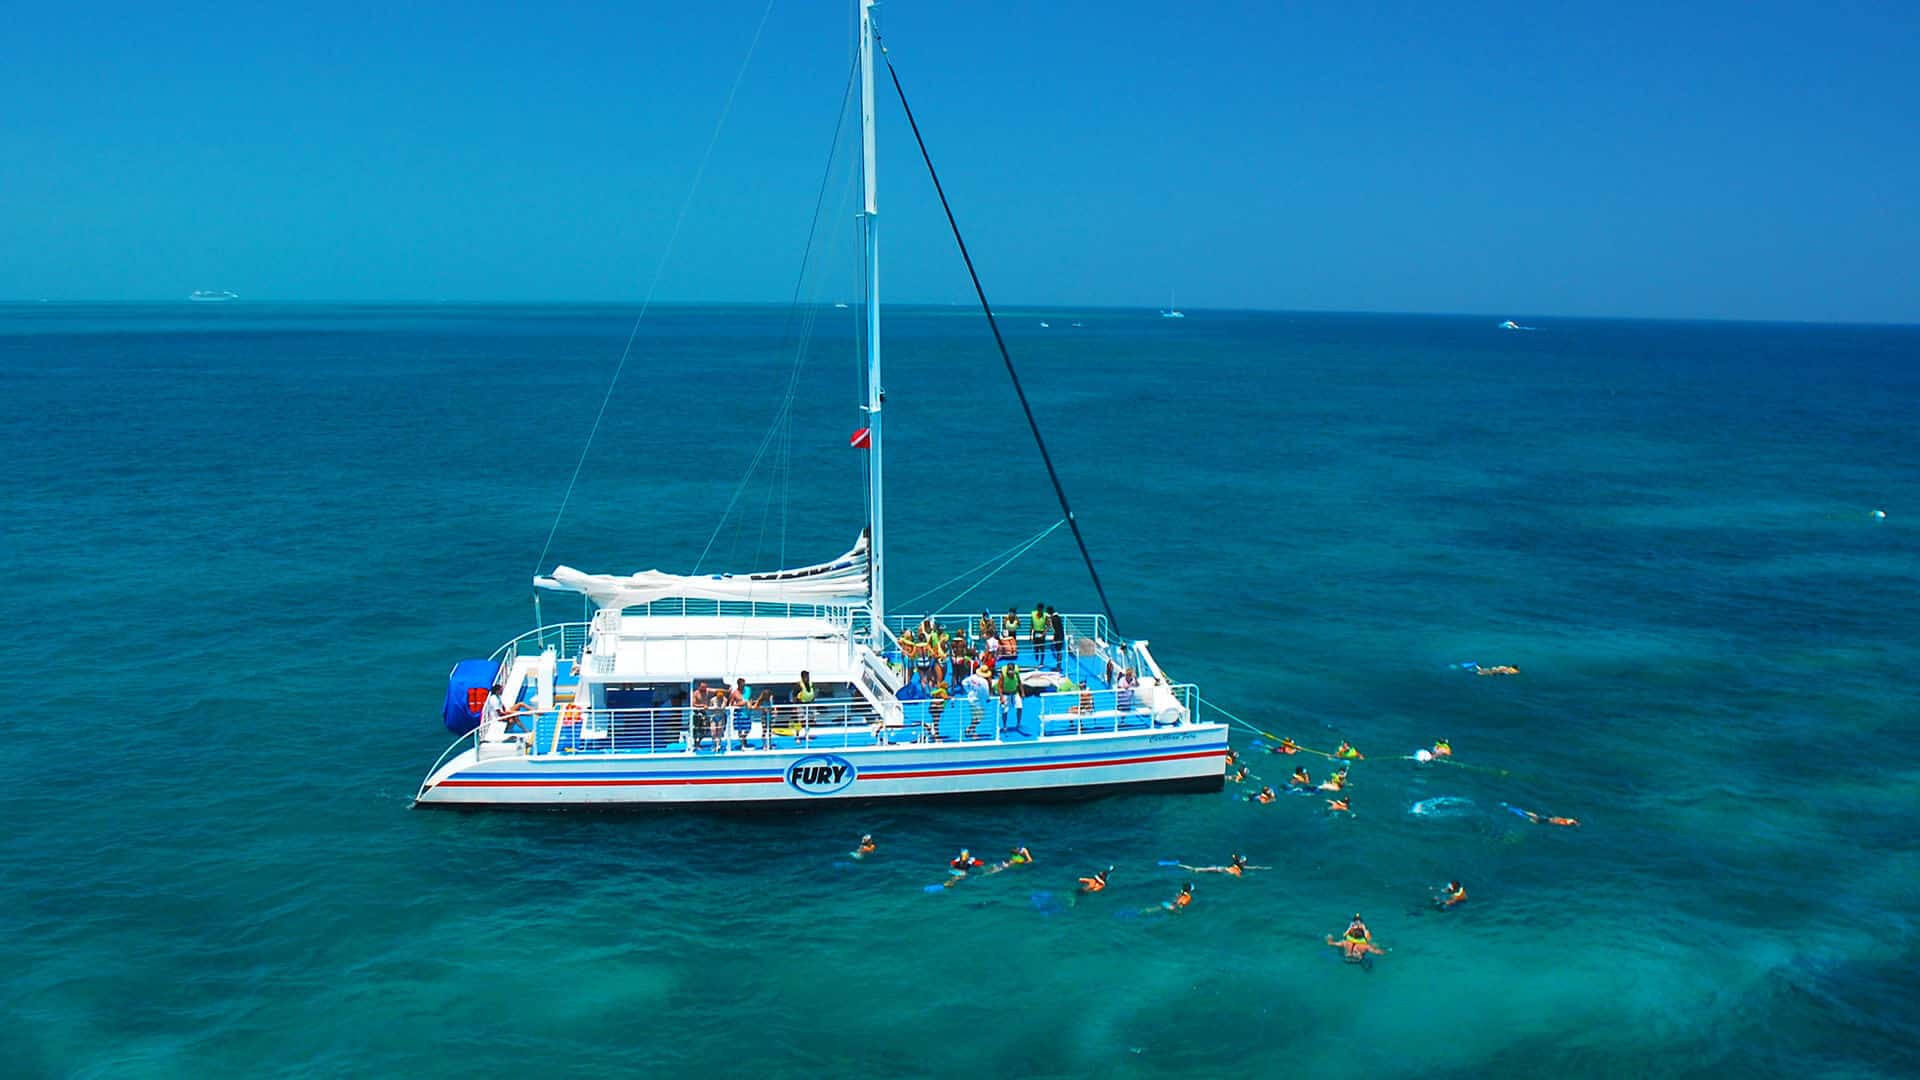 Image of people snorkeling on the Fury Snorkel Tour